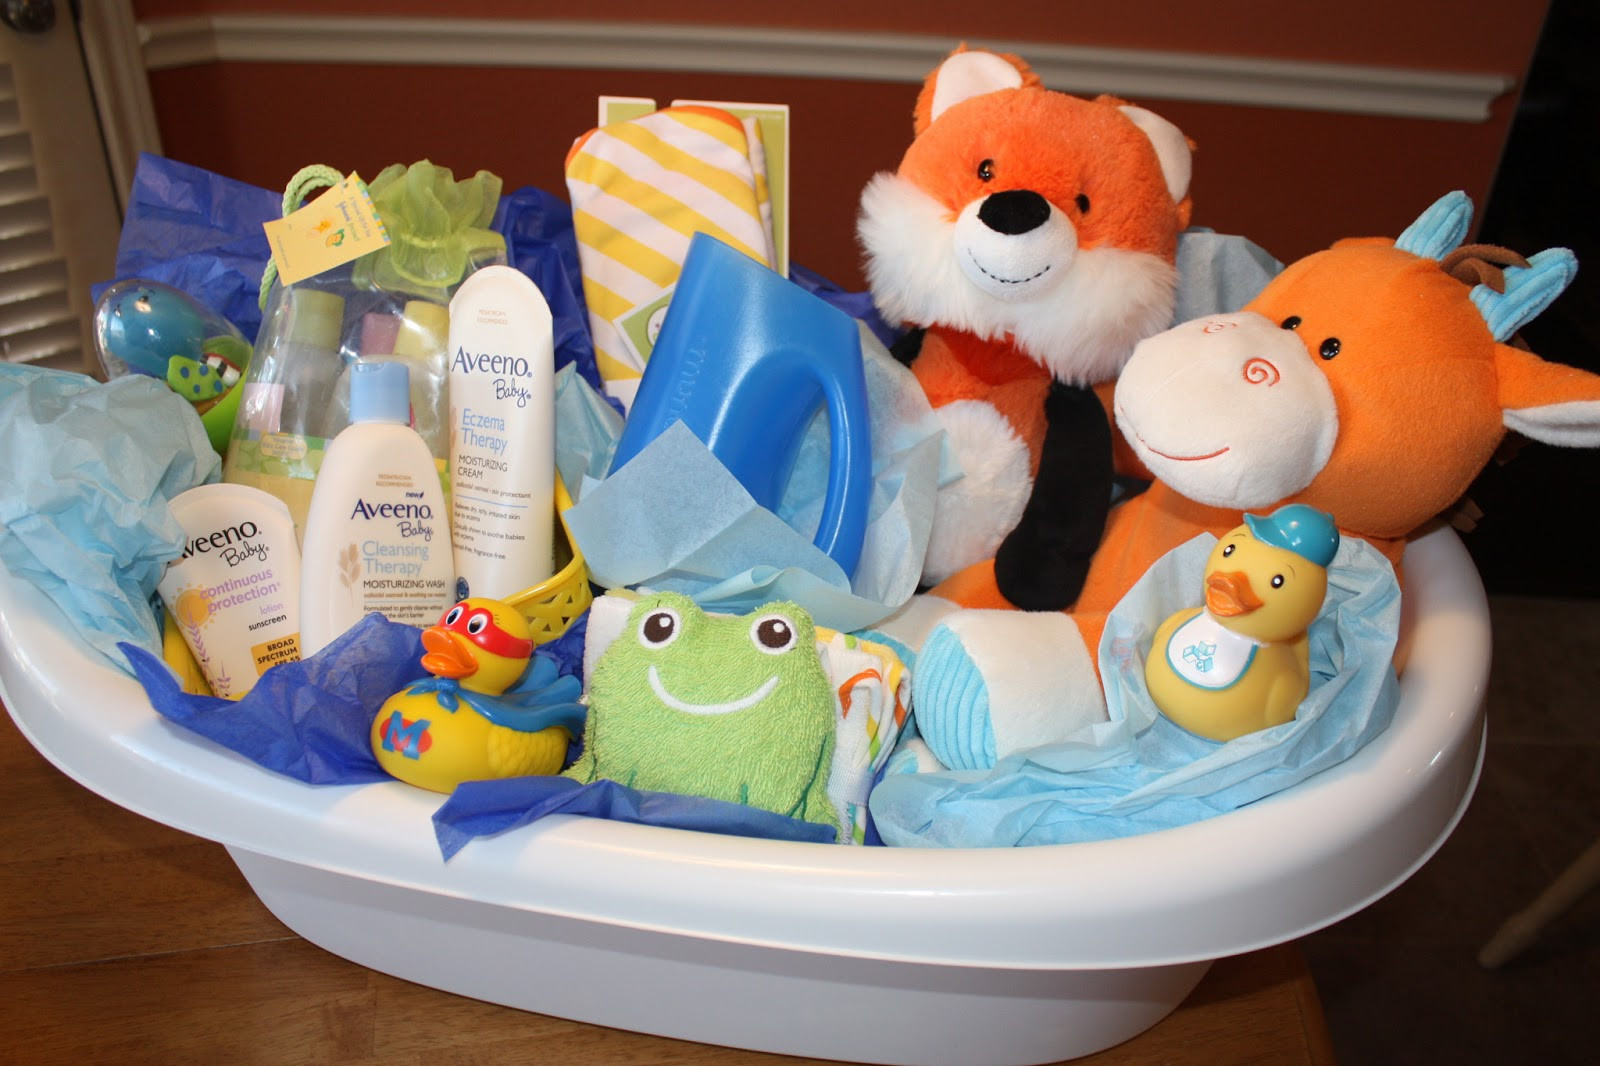 Babyshower Gift Ideas
 The Ultimate $5 99 Baby Shower Gift